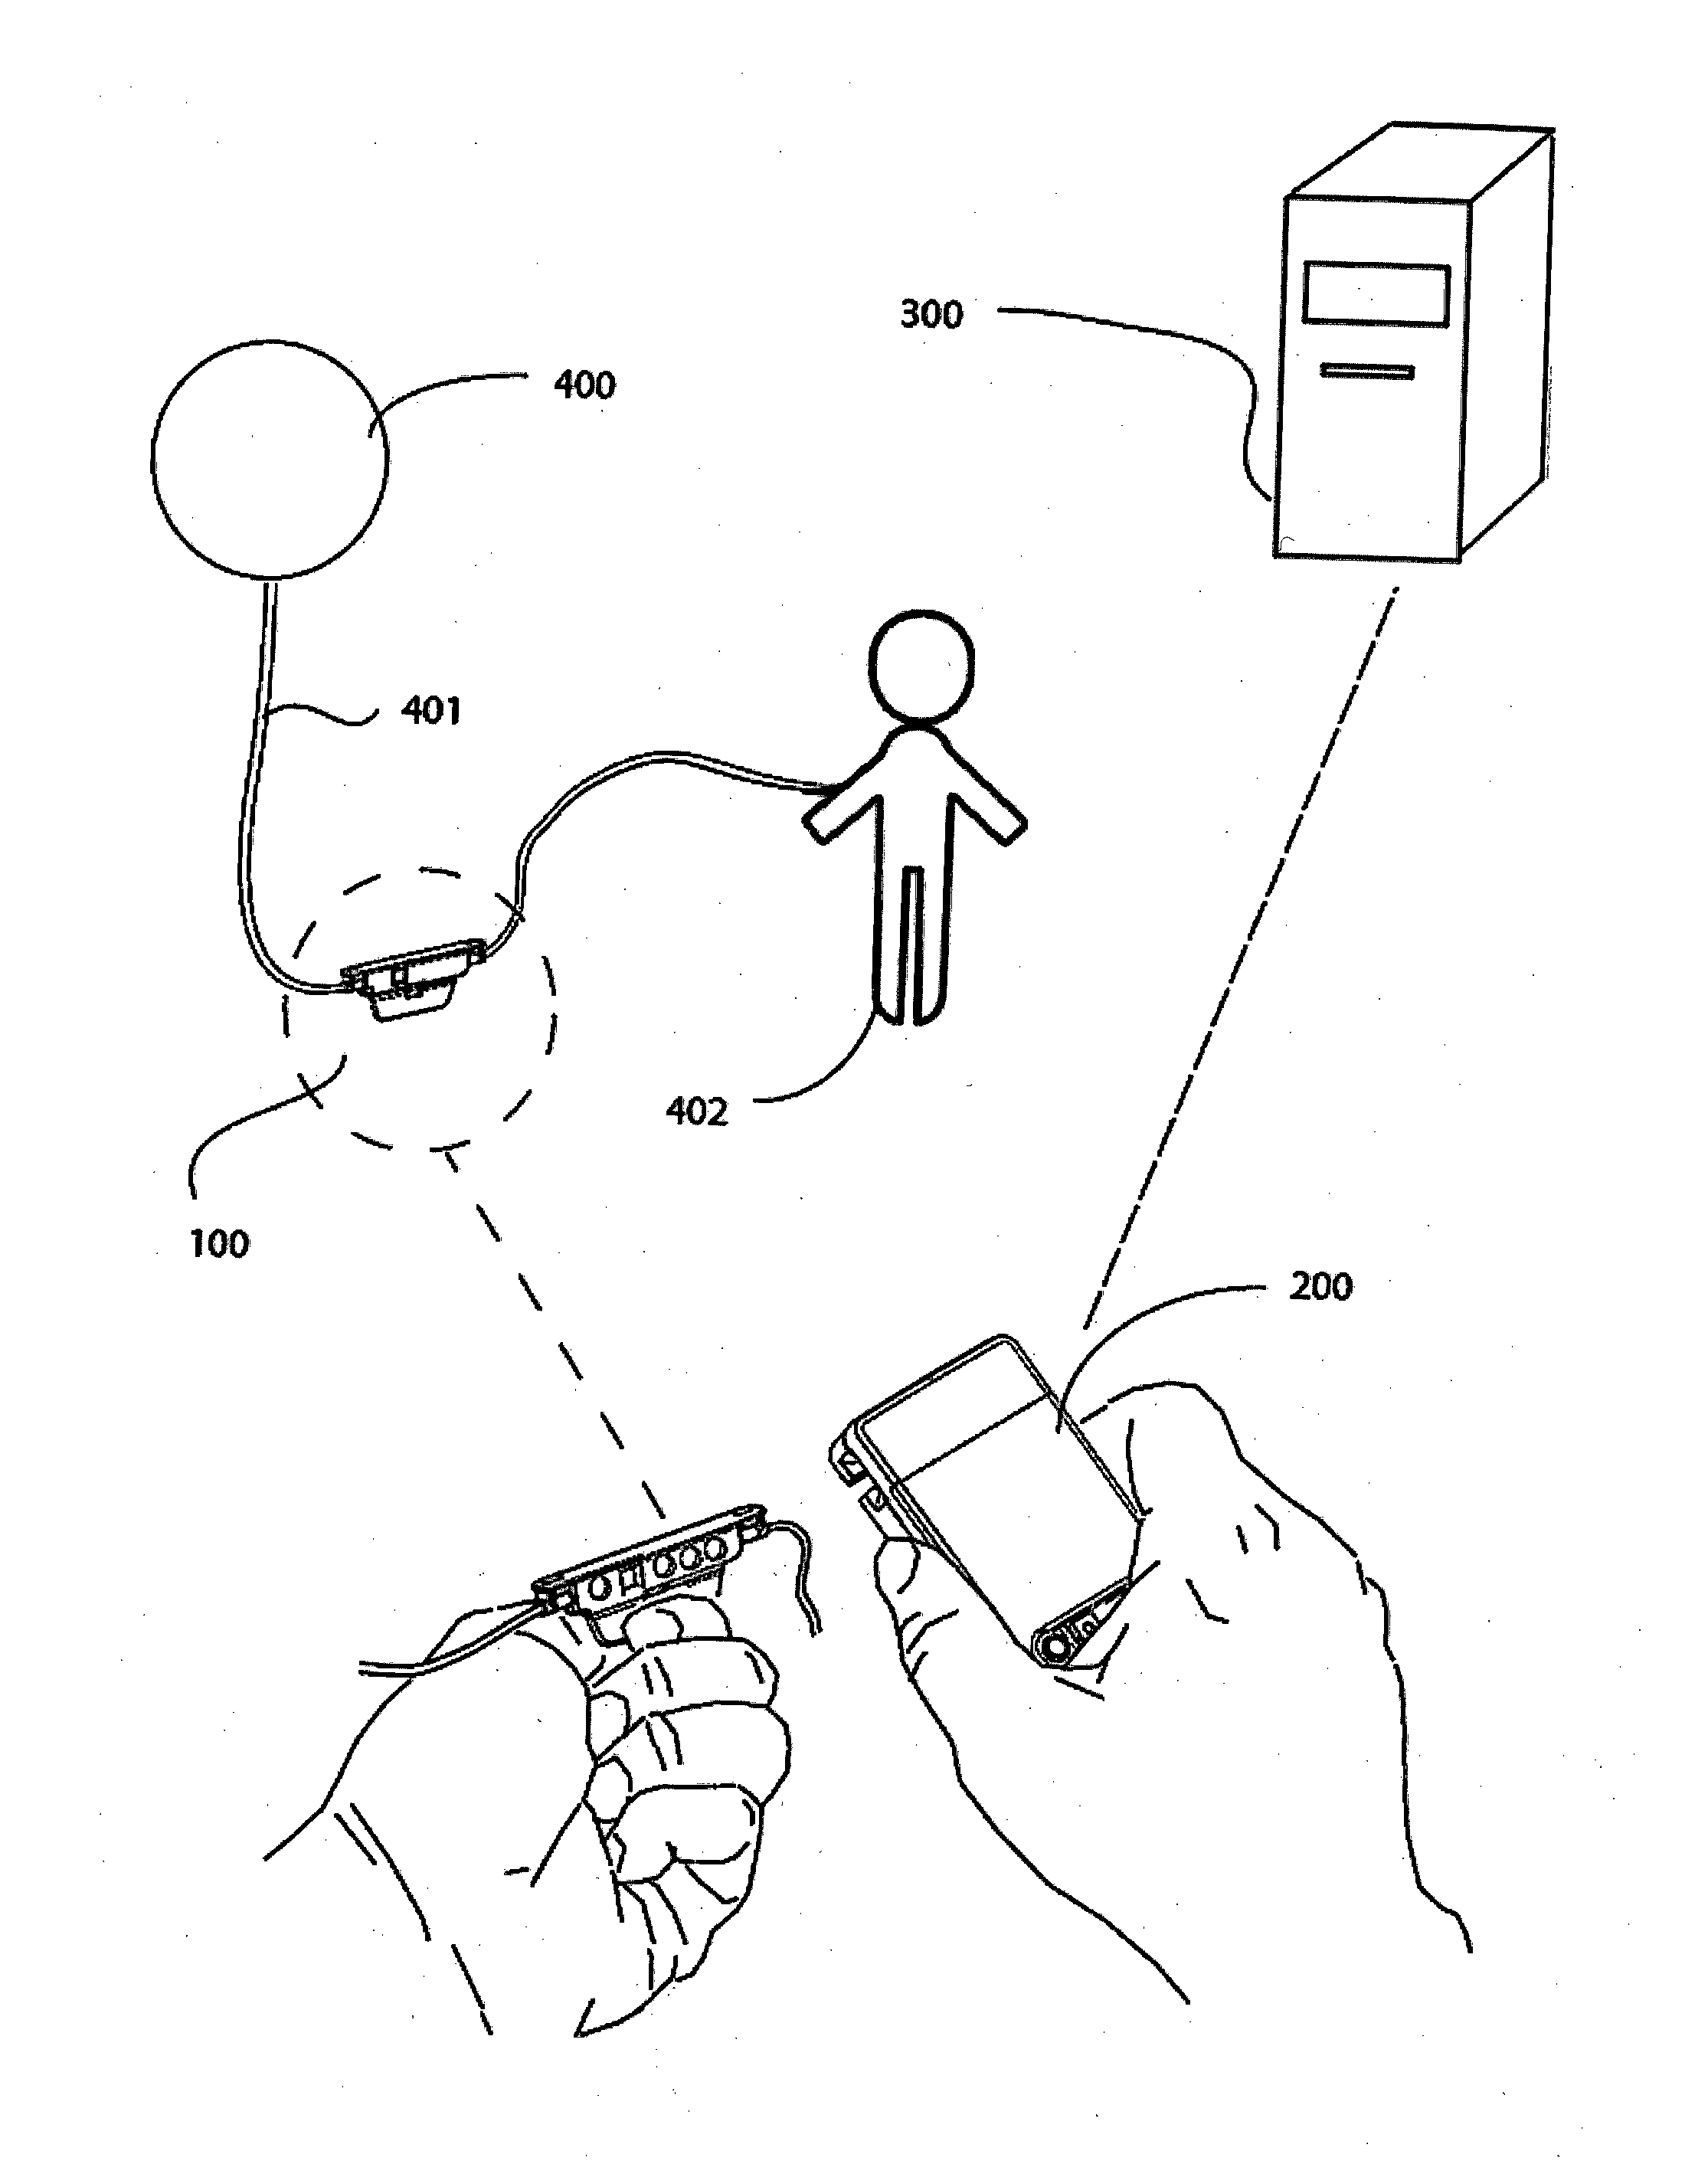 Intravenous (IV) infusion monitoring method and system